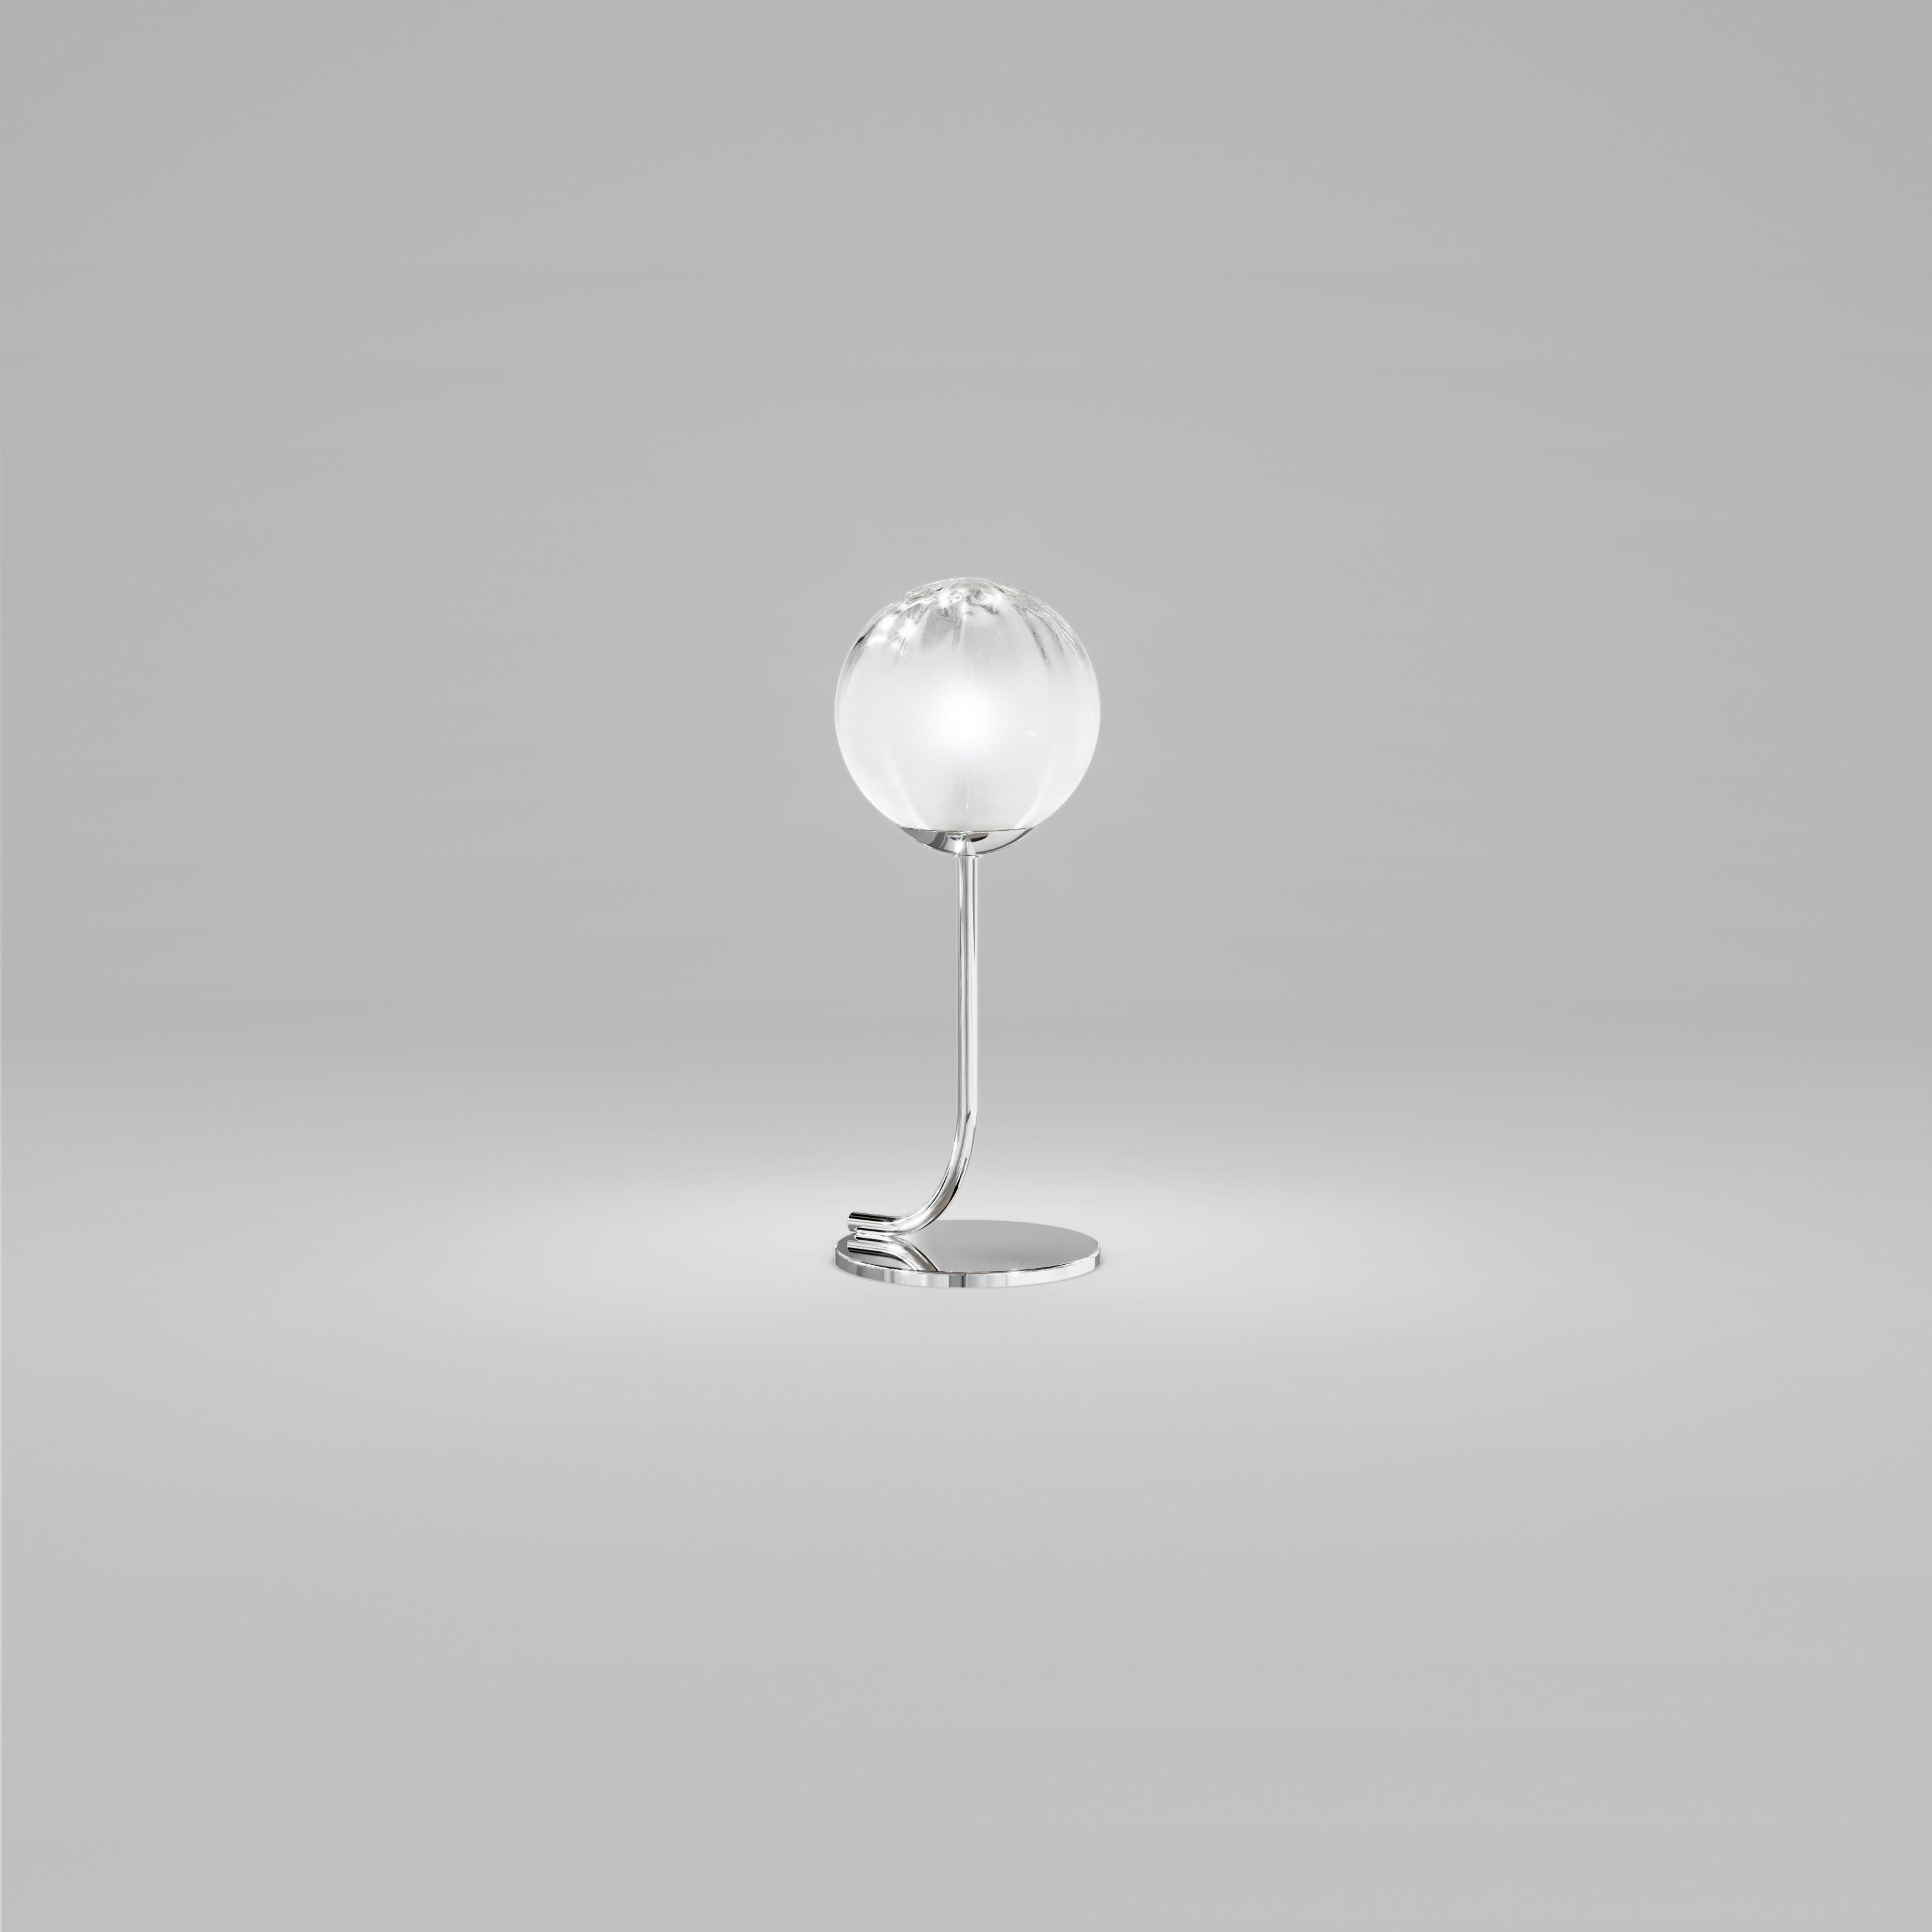 For Sale: White (White and Shaded) Vistosi Puppet Table Lamp in Murano Blown Glass and Metal Base